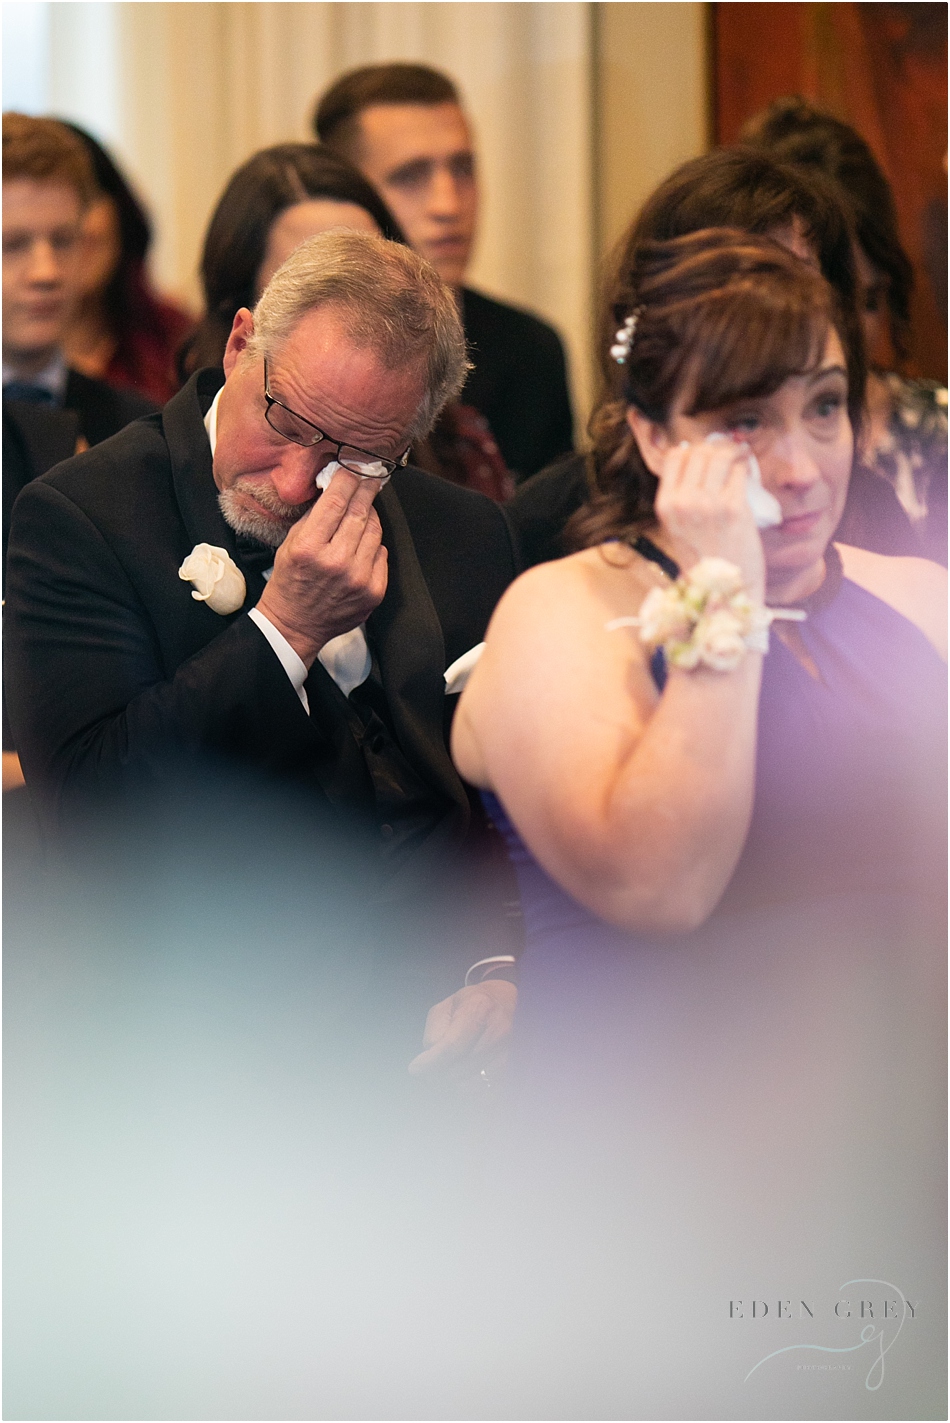 Emotional wedding pictures